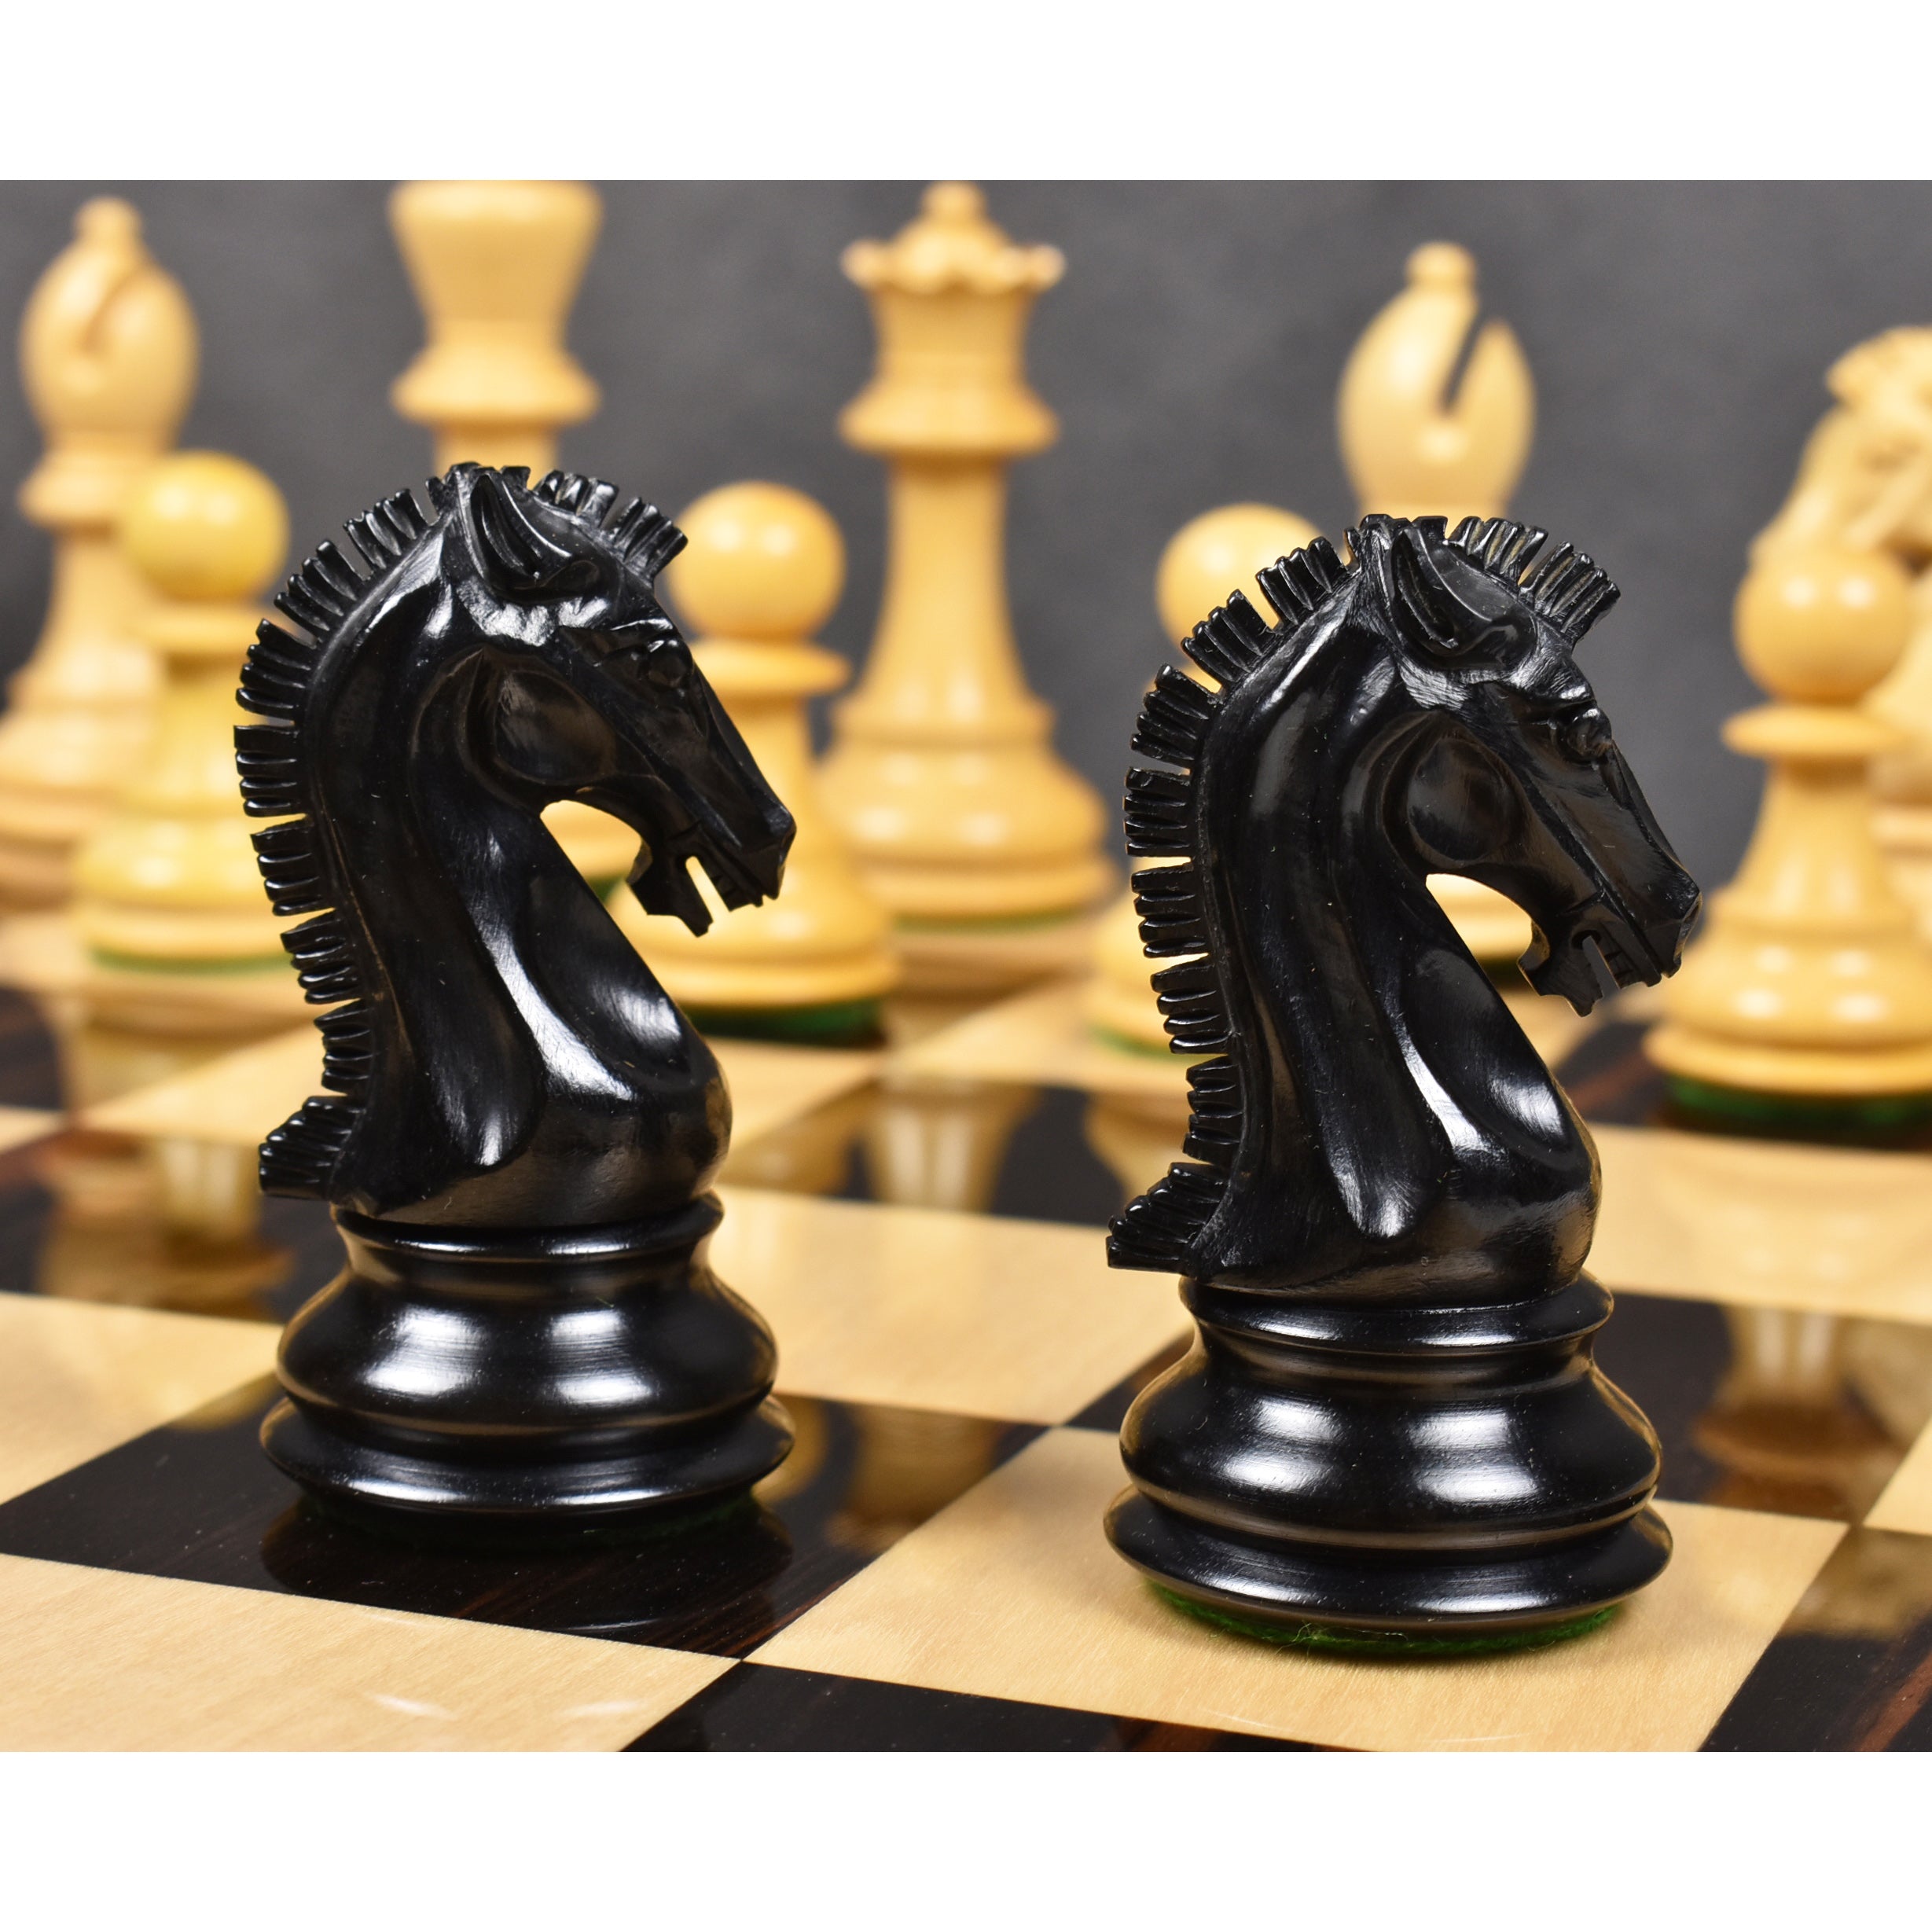 3.9 Craftsman Knight Staunton Chess Set- Chess Pieces Only - Double W